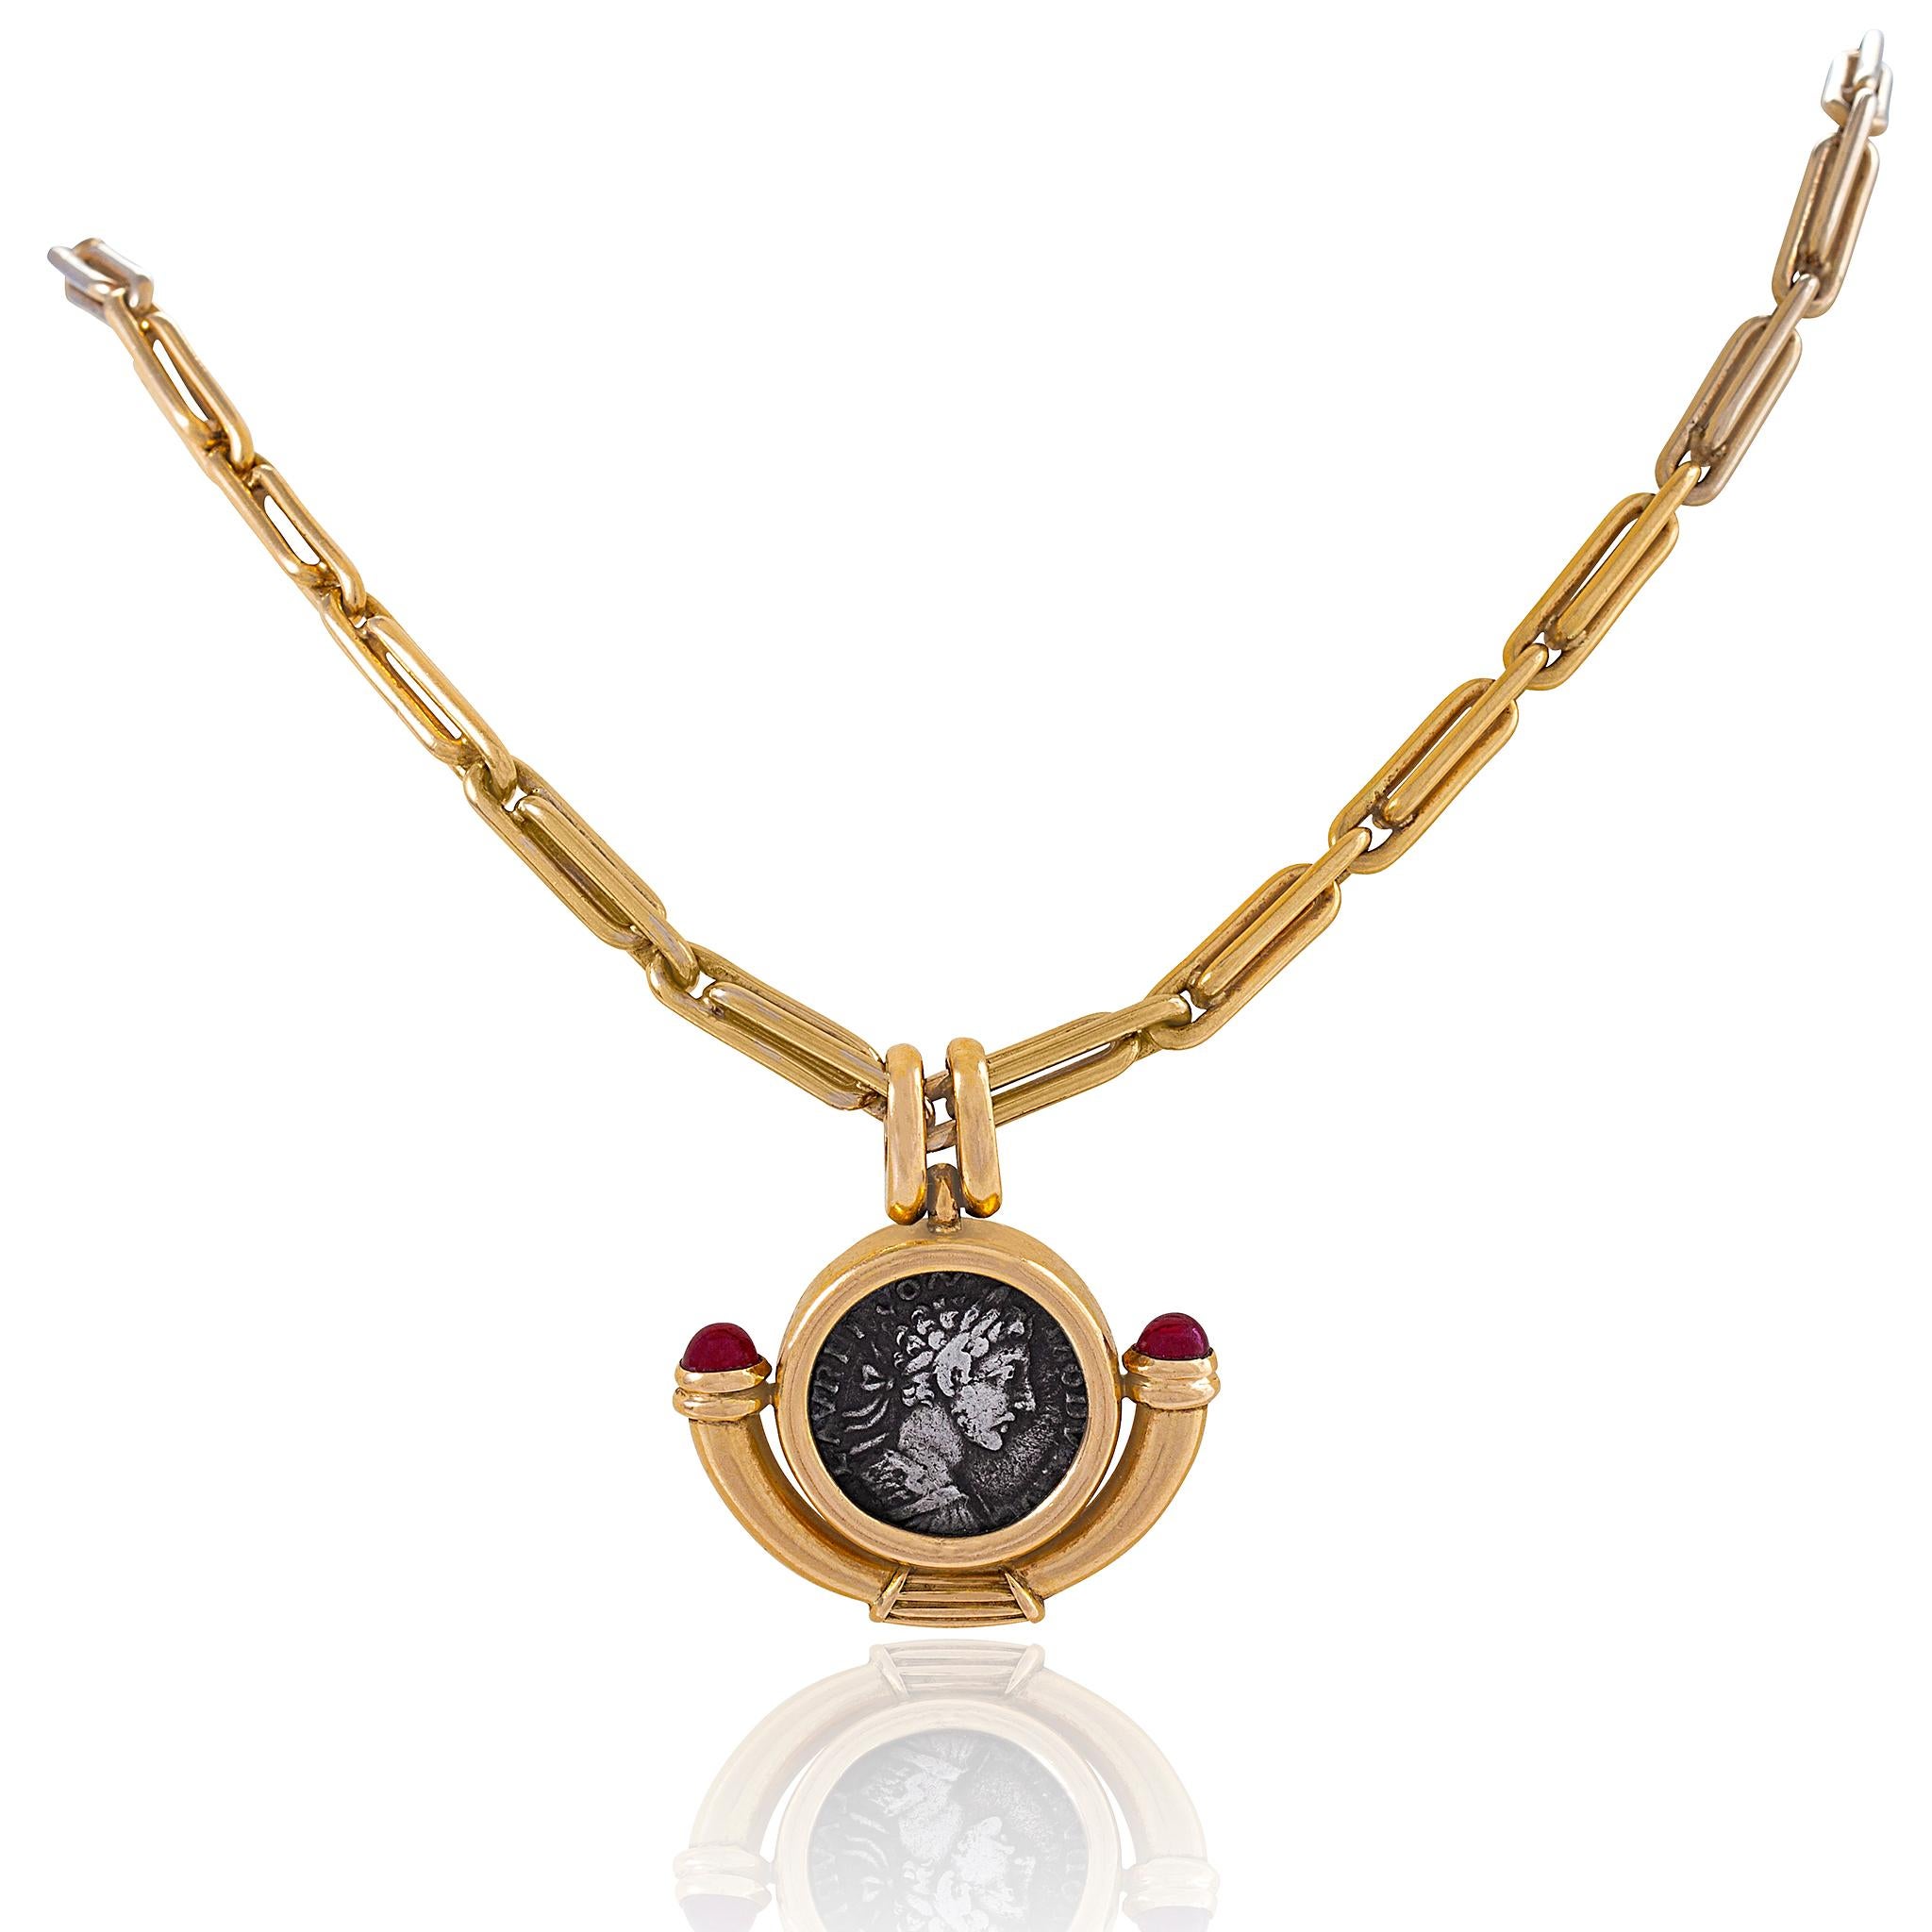 This idea for this ancient coin necklace, belonging to Bulgari’s “Monete